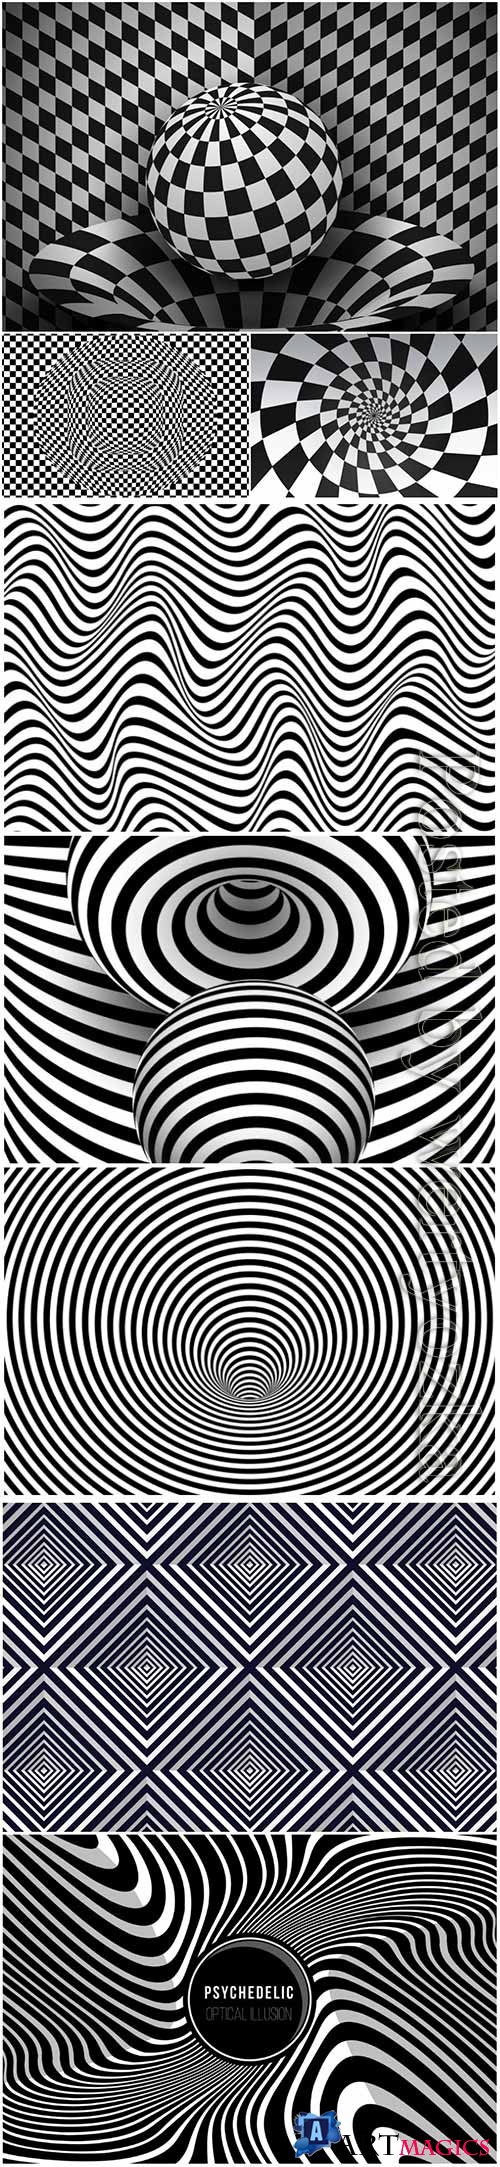 Psychedelic optical illusion vector background # 2